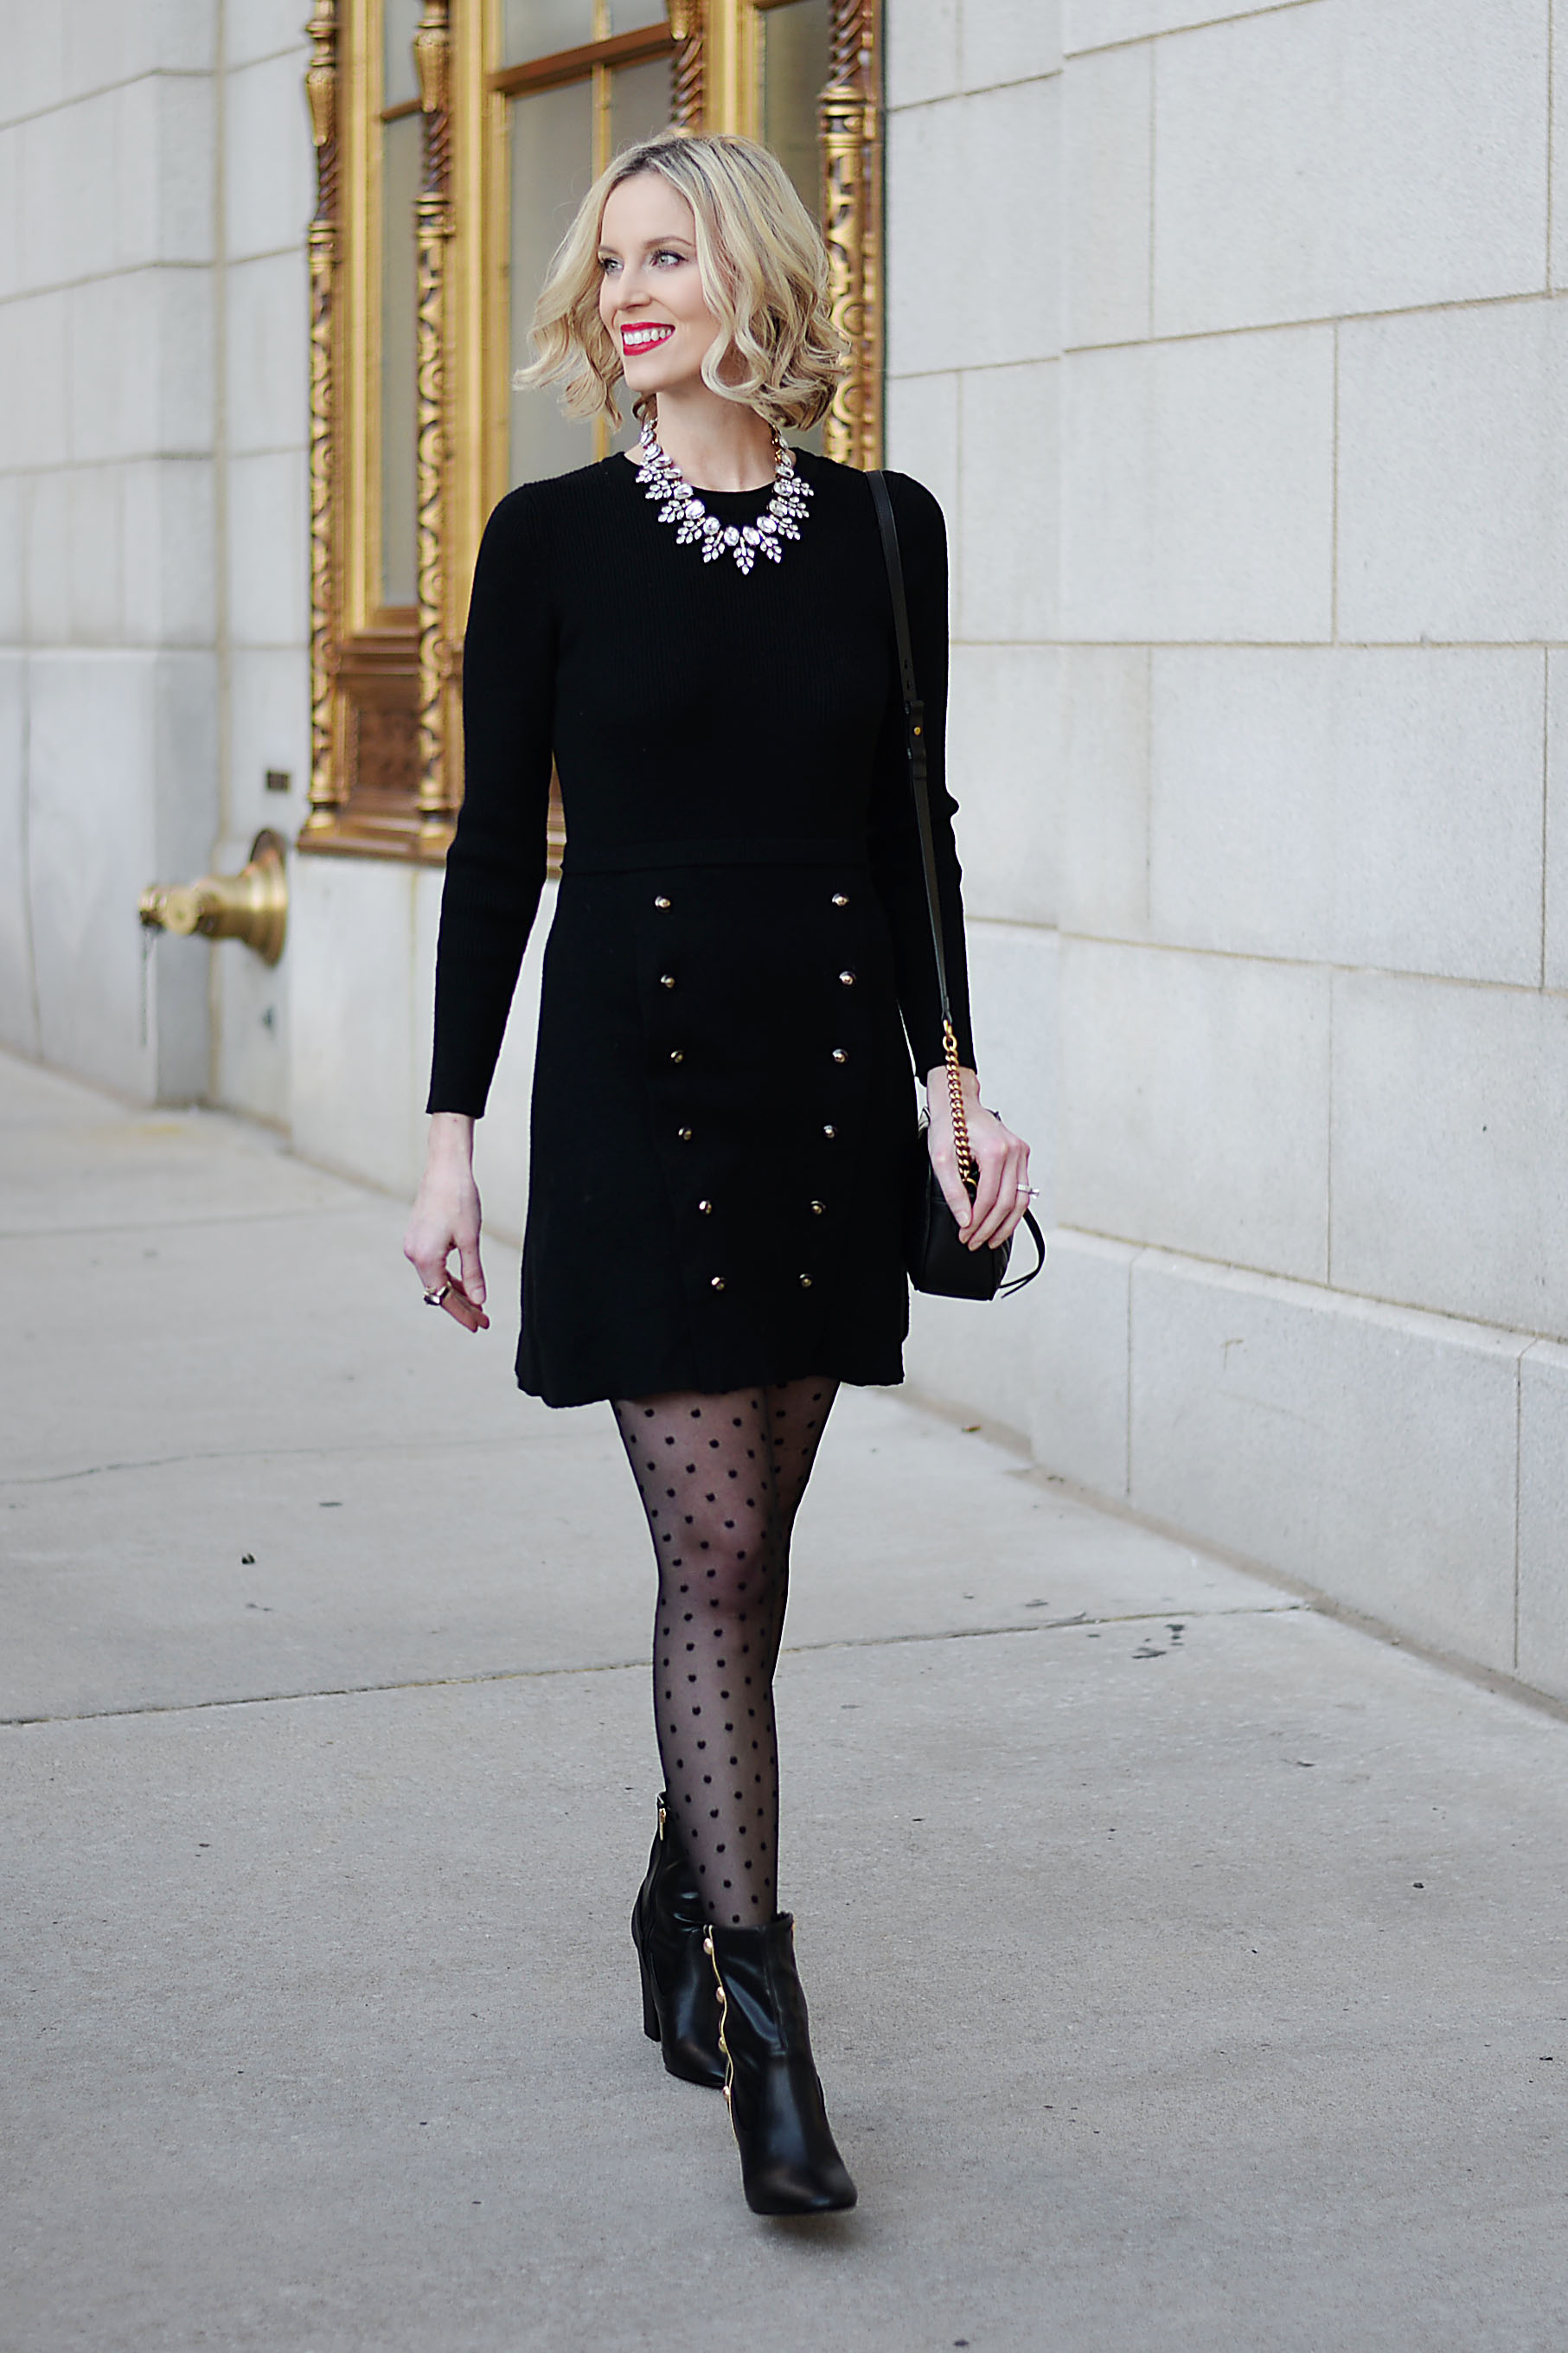 Work Holiday Party Outfit Idea + Boot Giveaway - Straight A Style